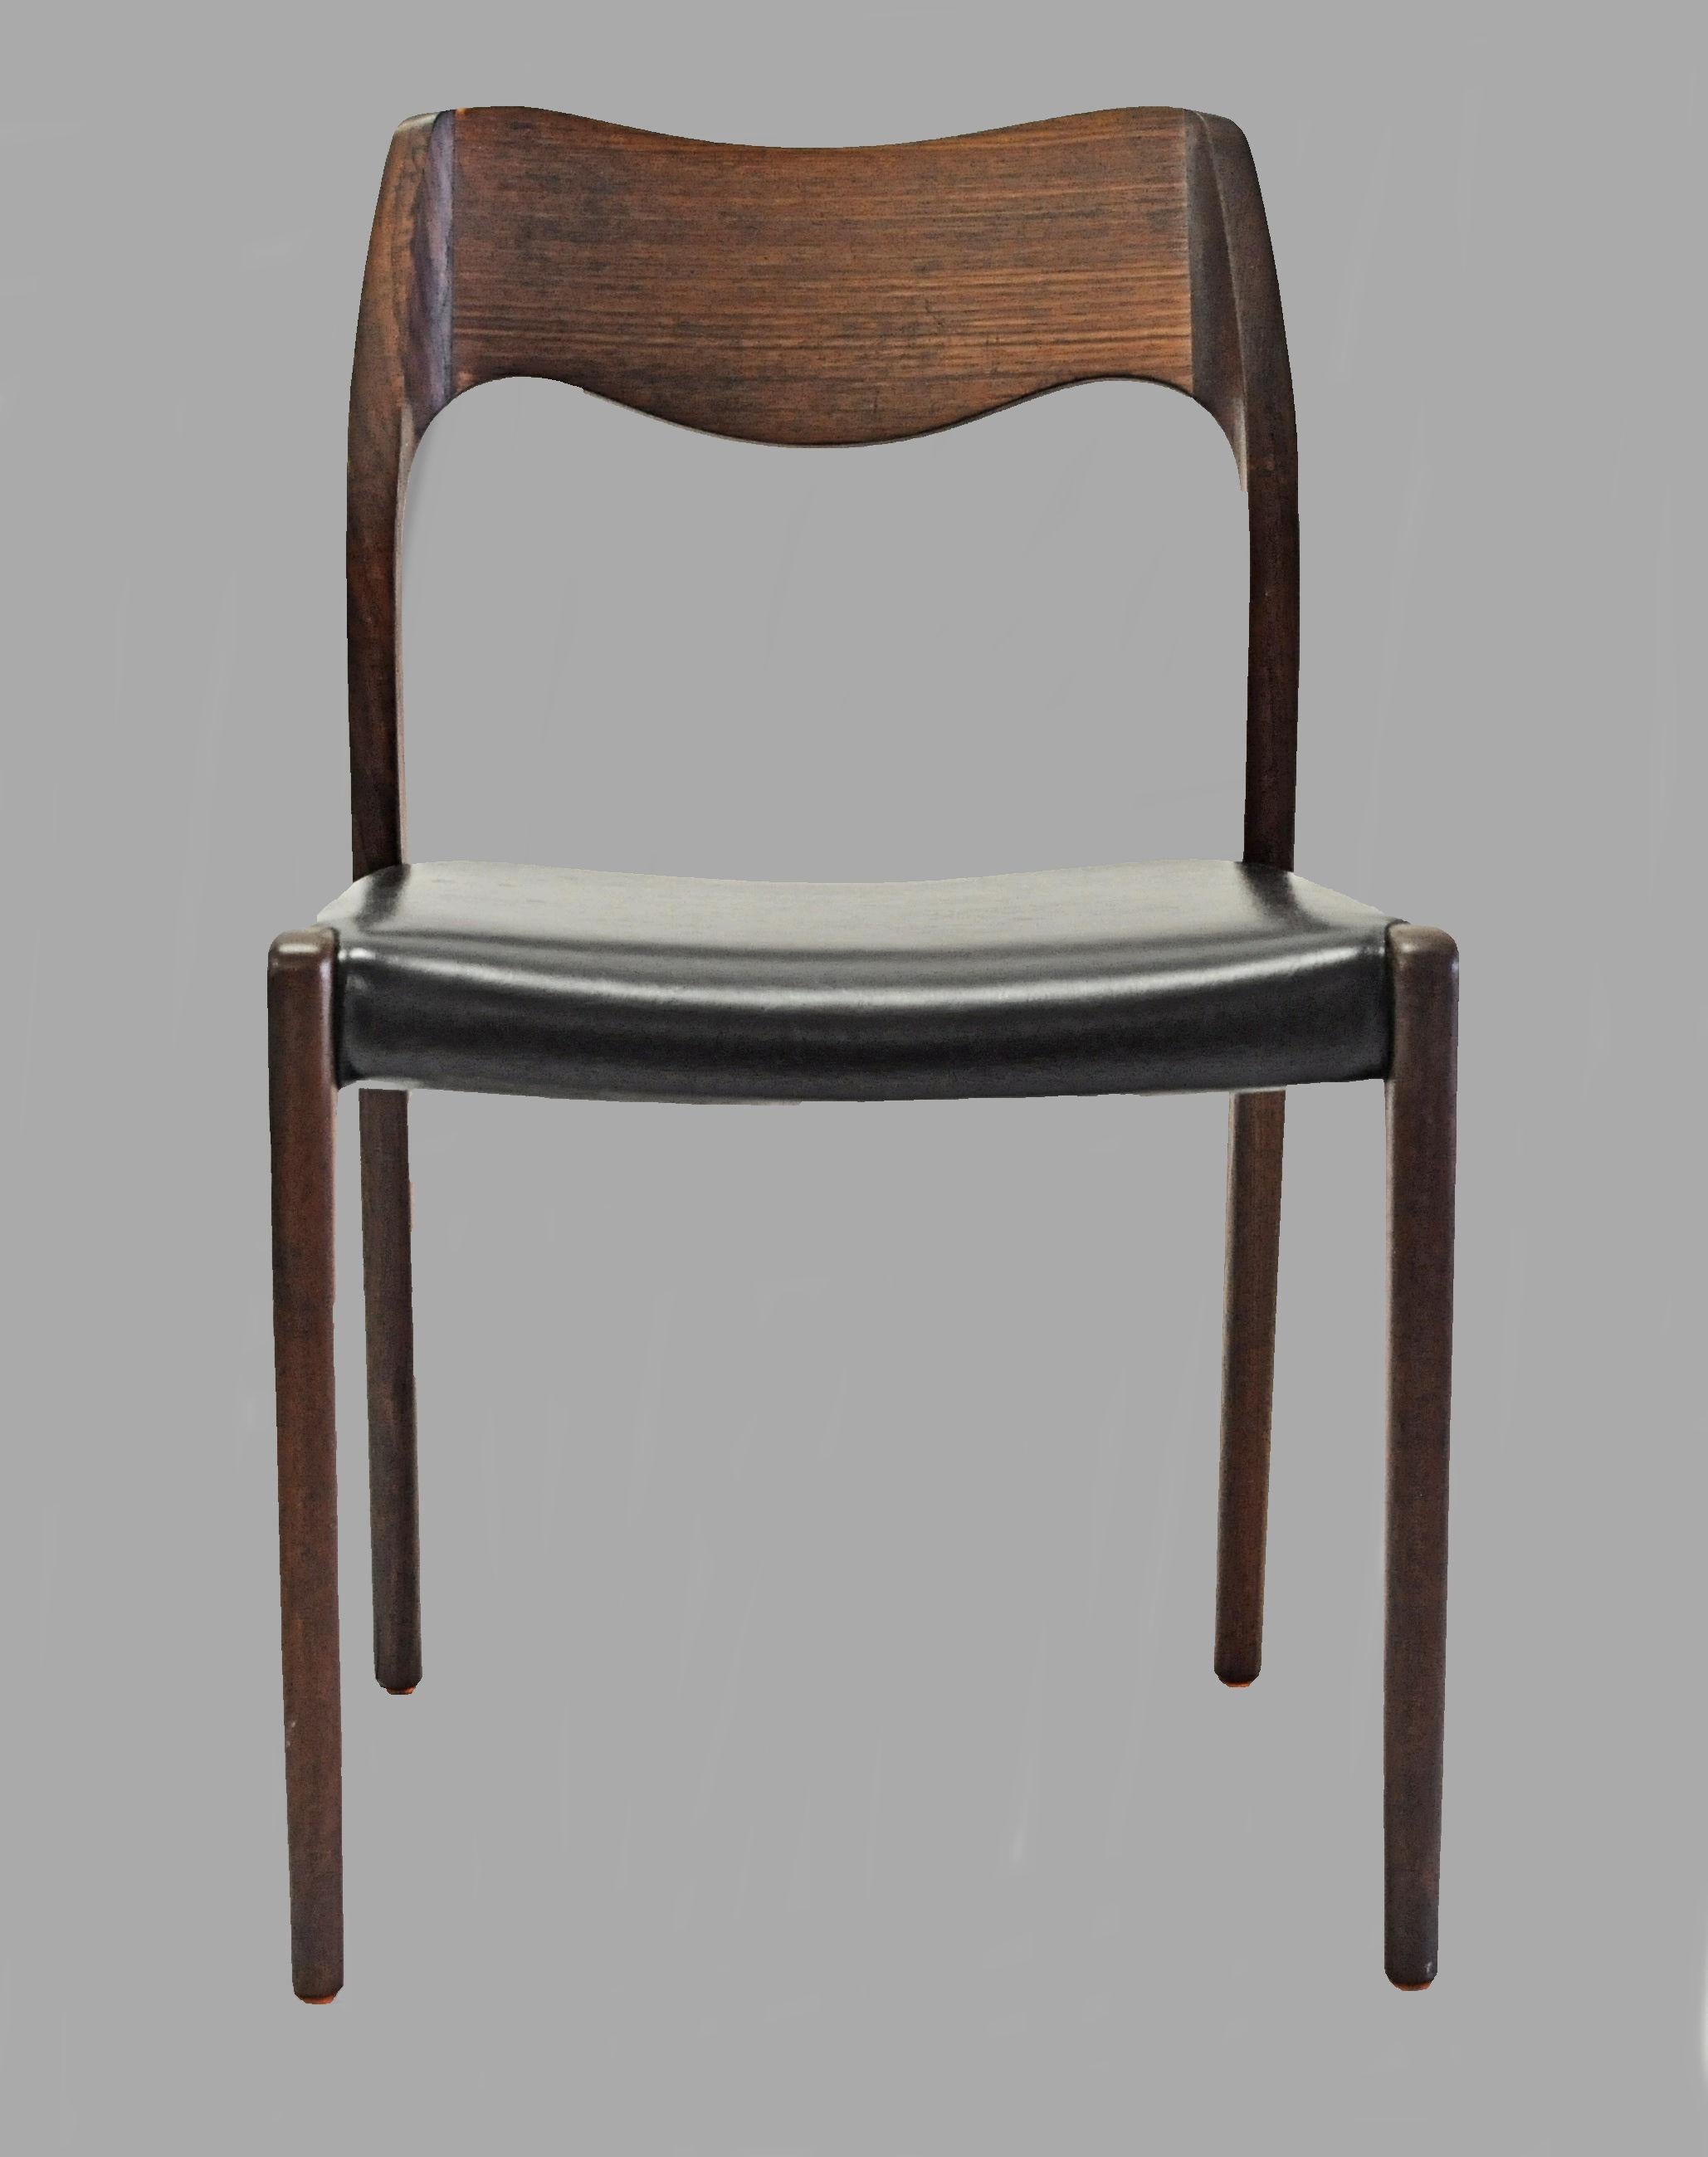 Set of 6 teak dining chairs designed by Niels Otto Møller in 1951.

The chairs feature a solid frame and backrest in teak designed with straight lined legs and an elegant organic shaped backrest with the soft lines and curves that you often see in